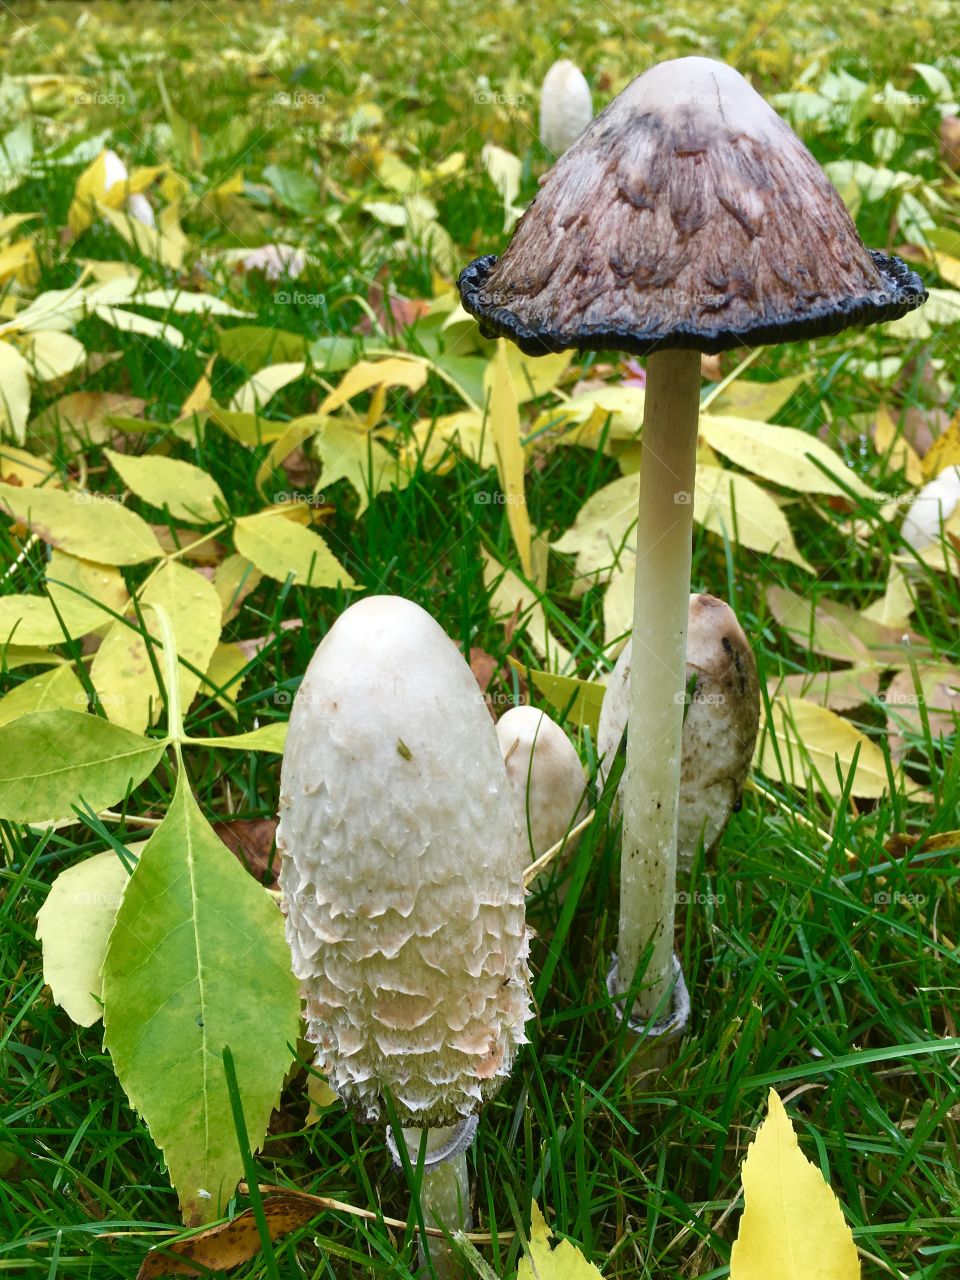 Two stages of shaggy mane mushrooms